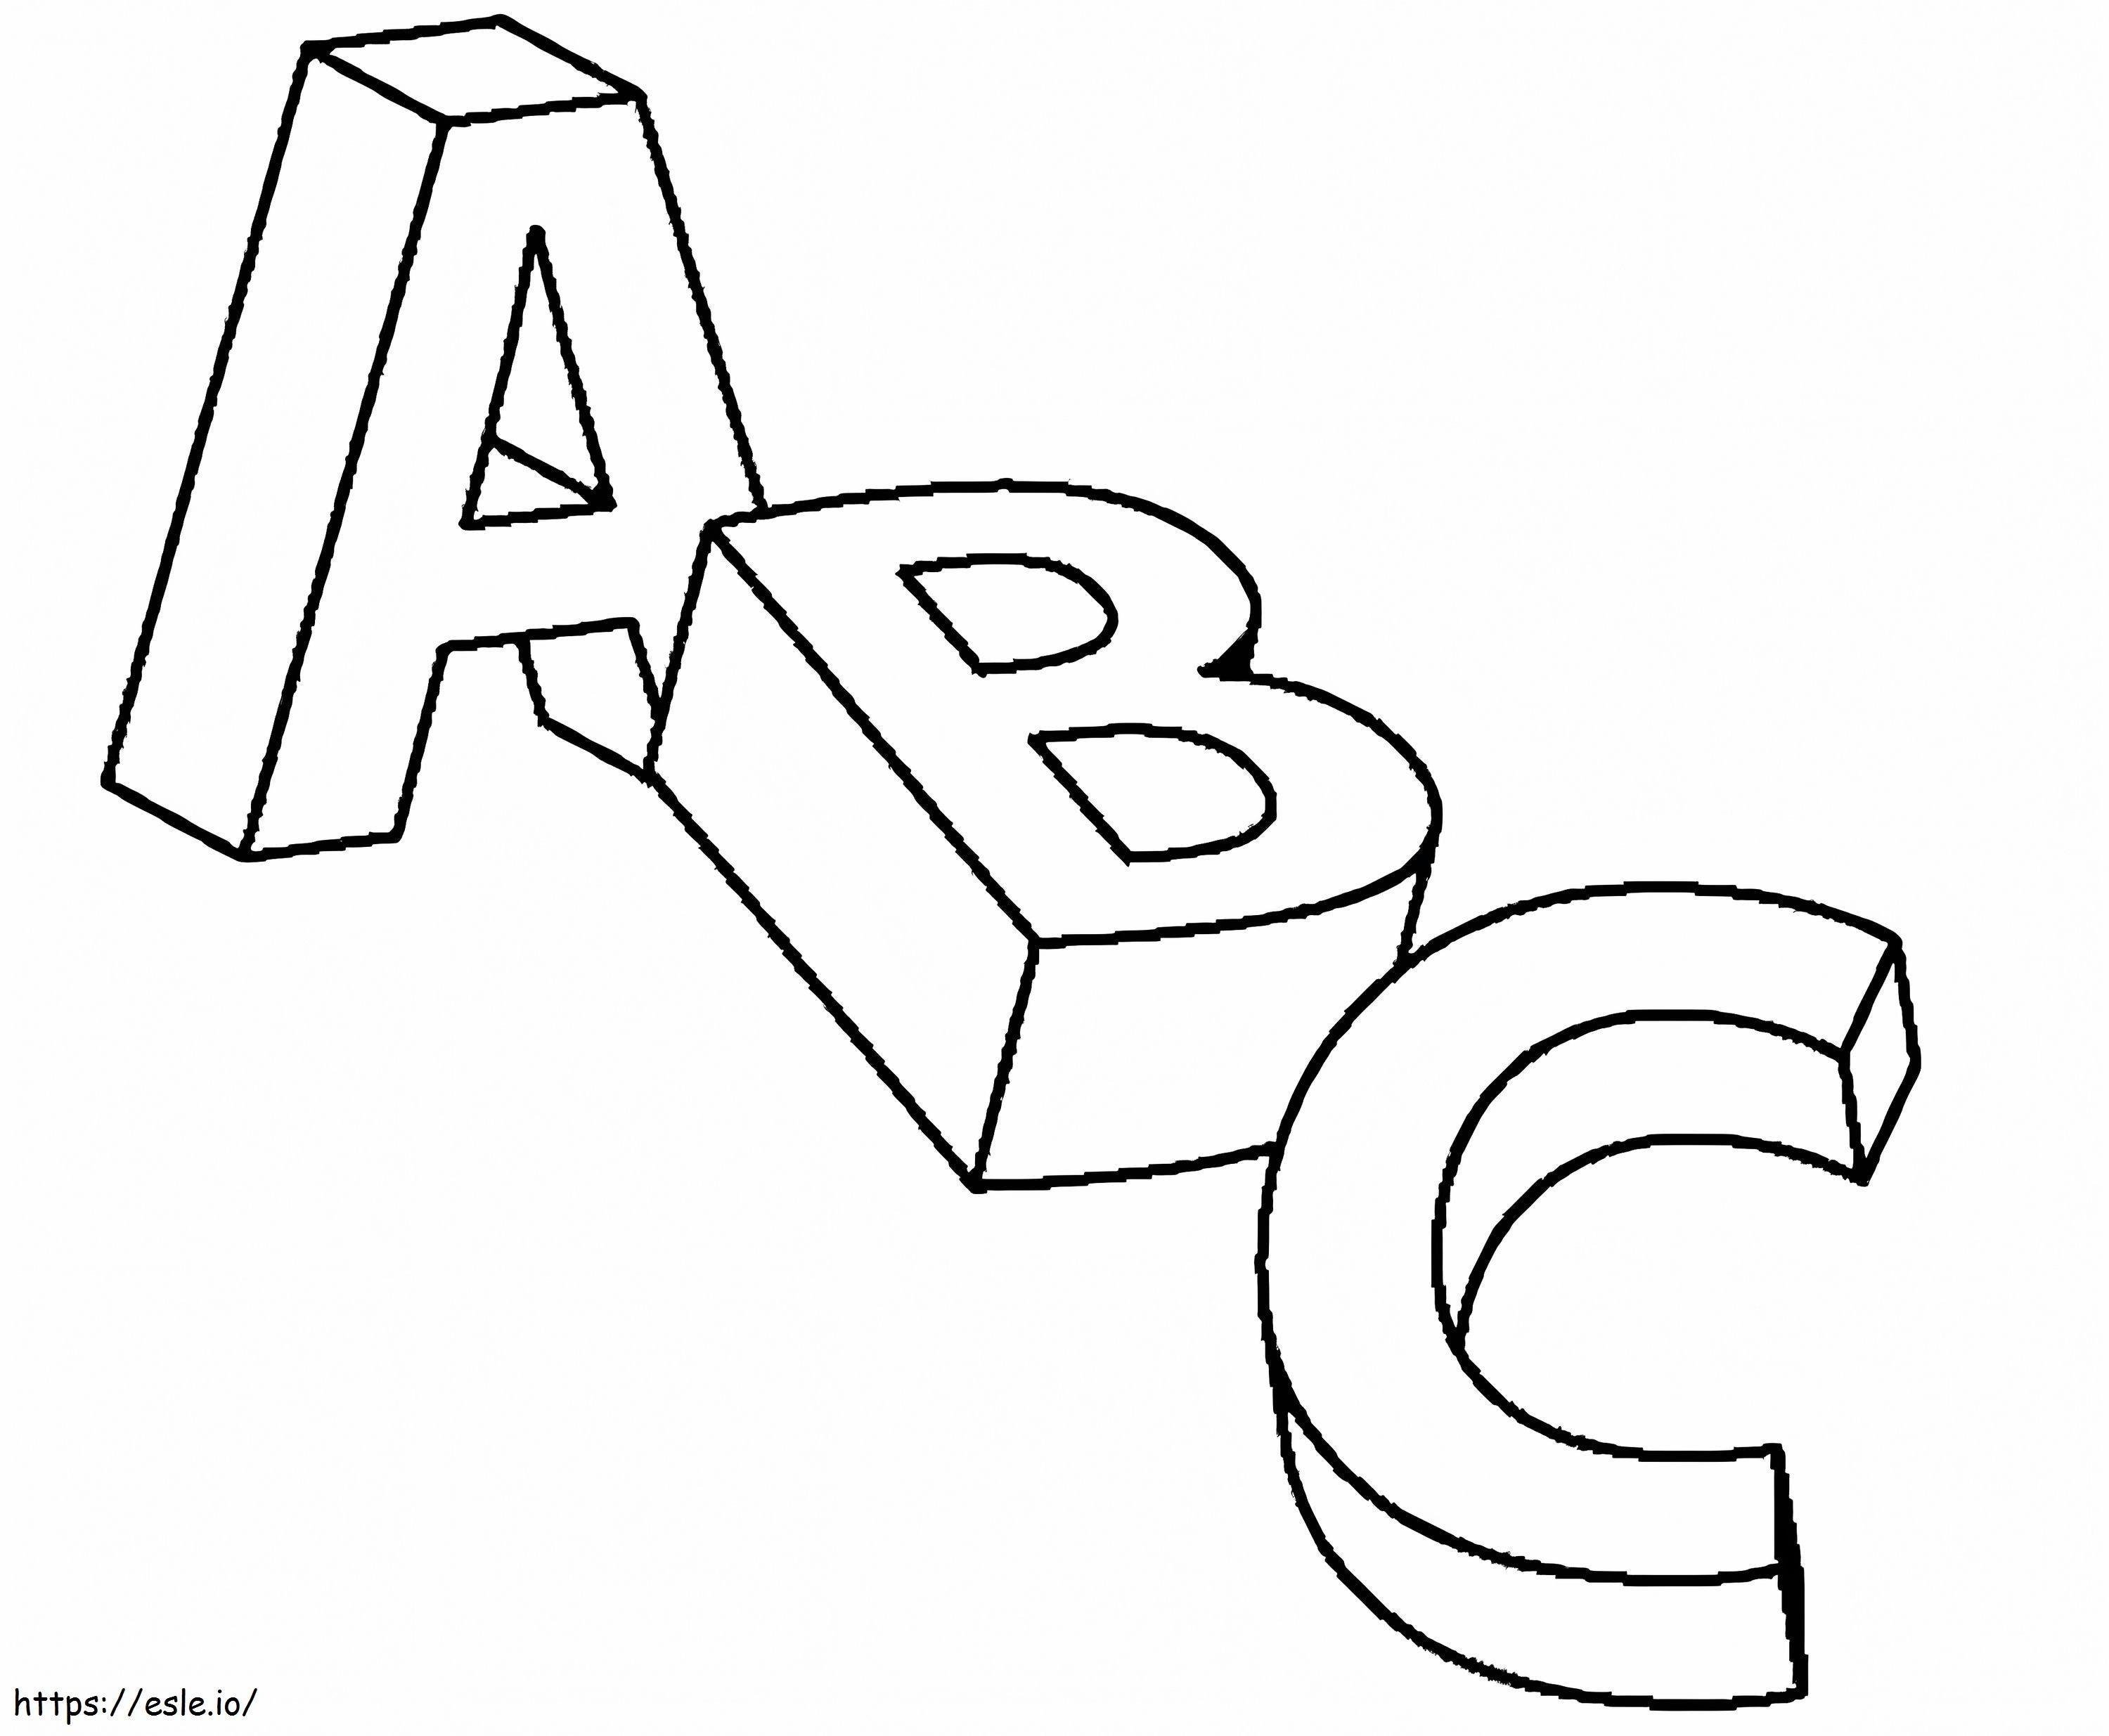 Basic Abc coloring page